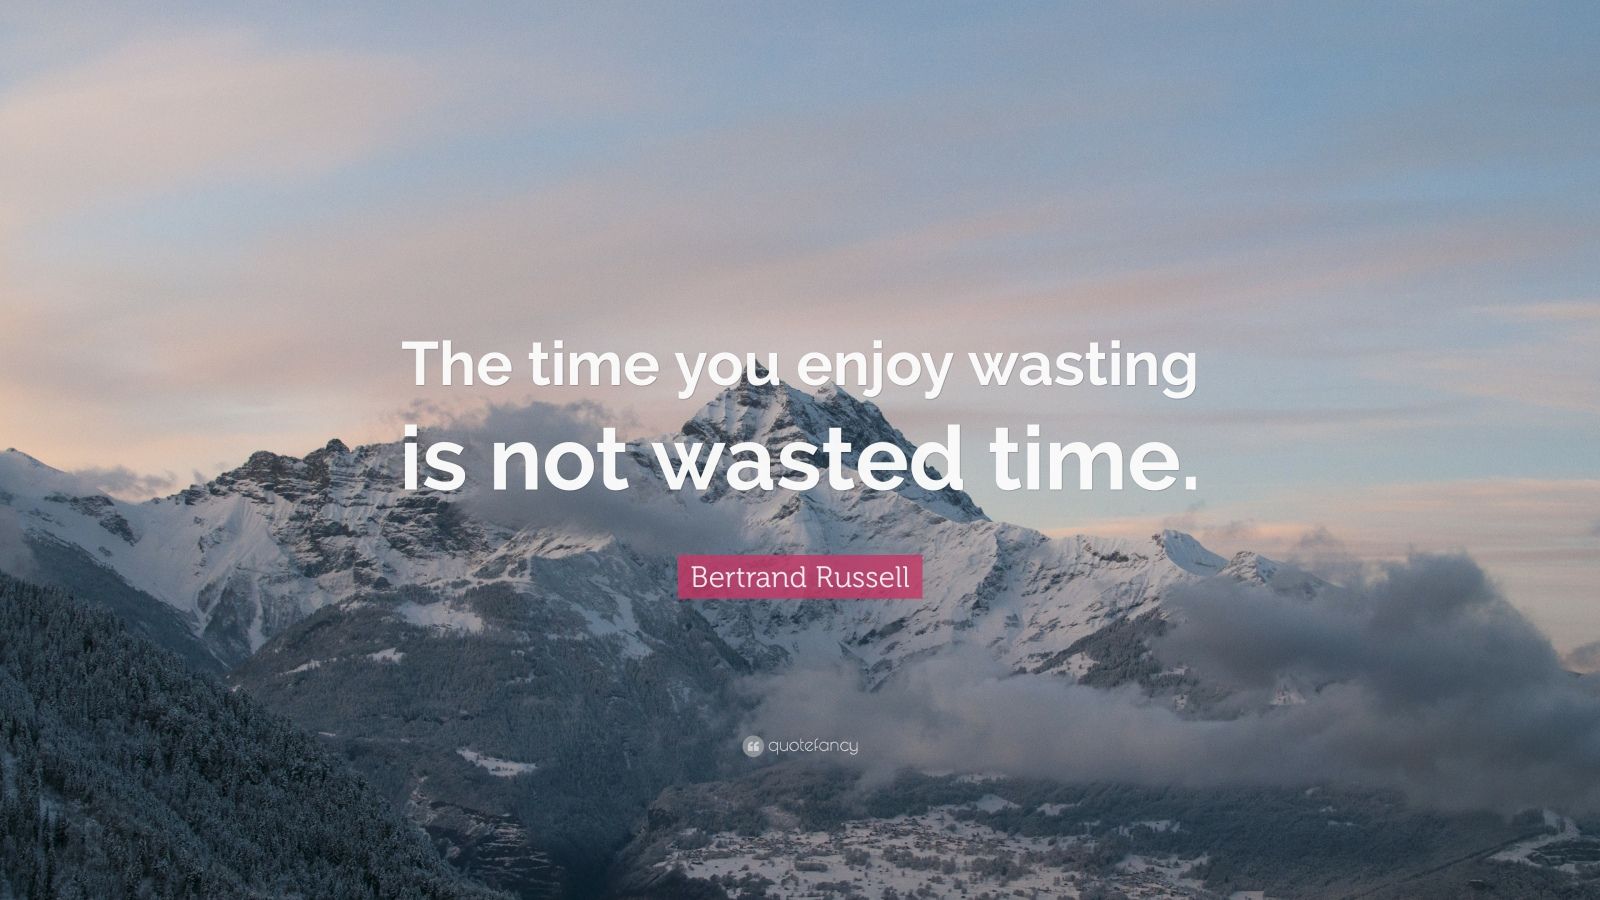 Bertrand Russell Quote: “The time you enjoy wasting is not wasted time